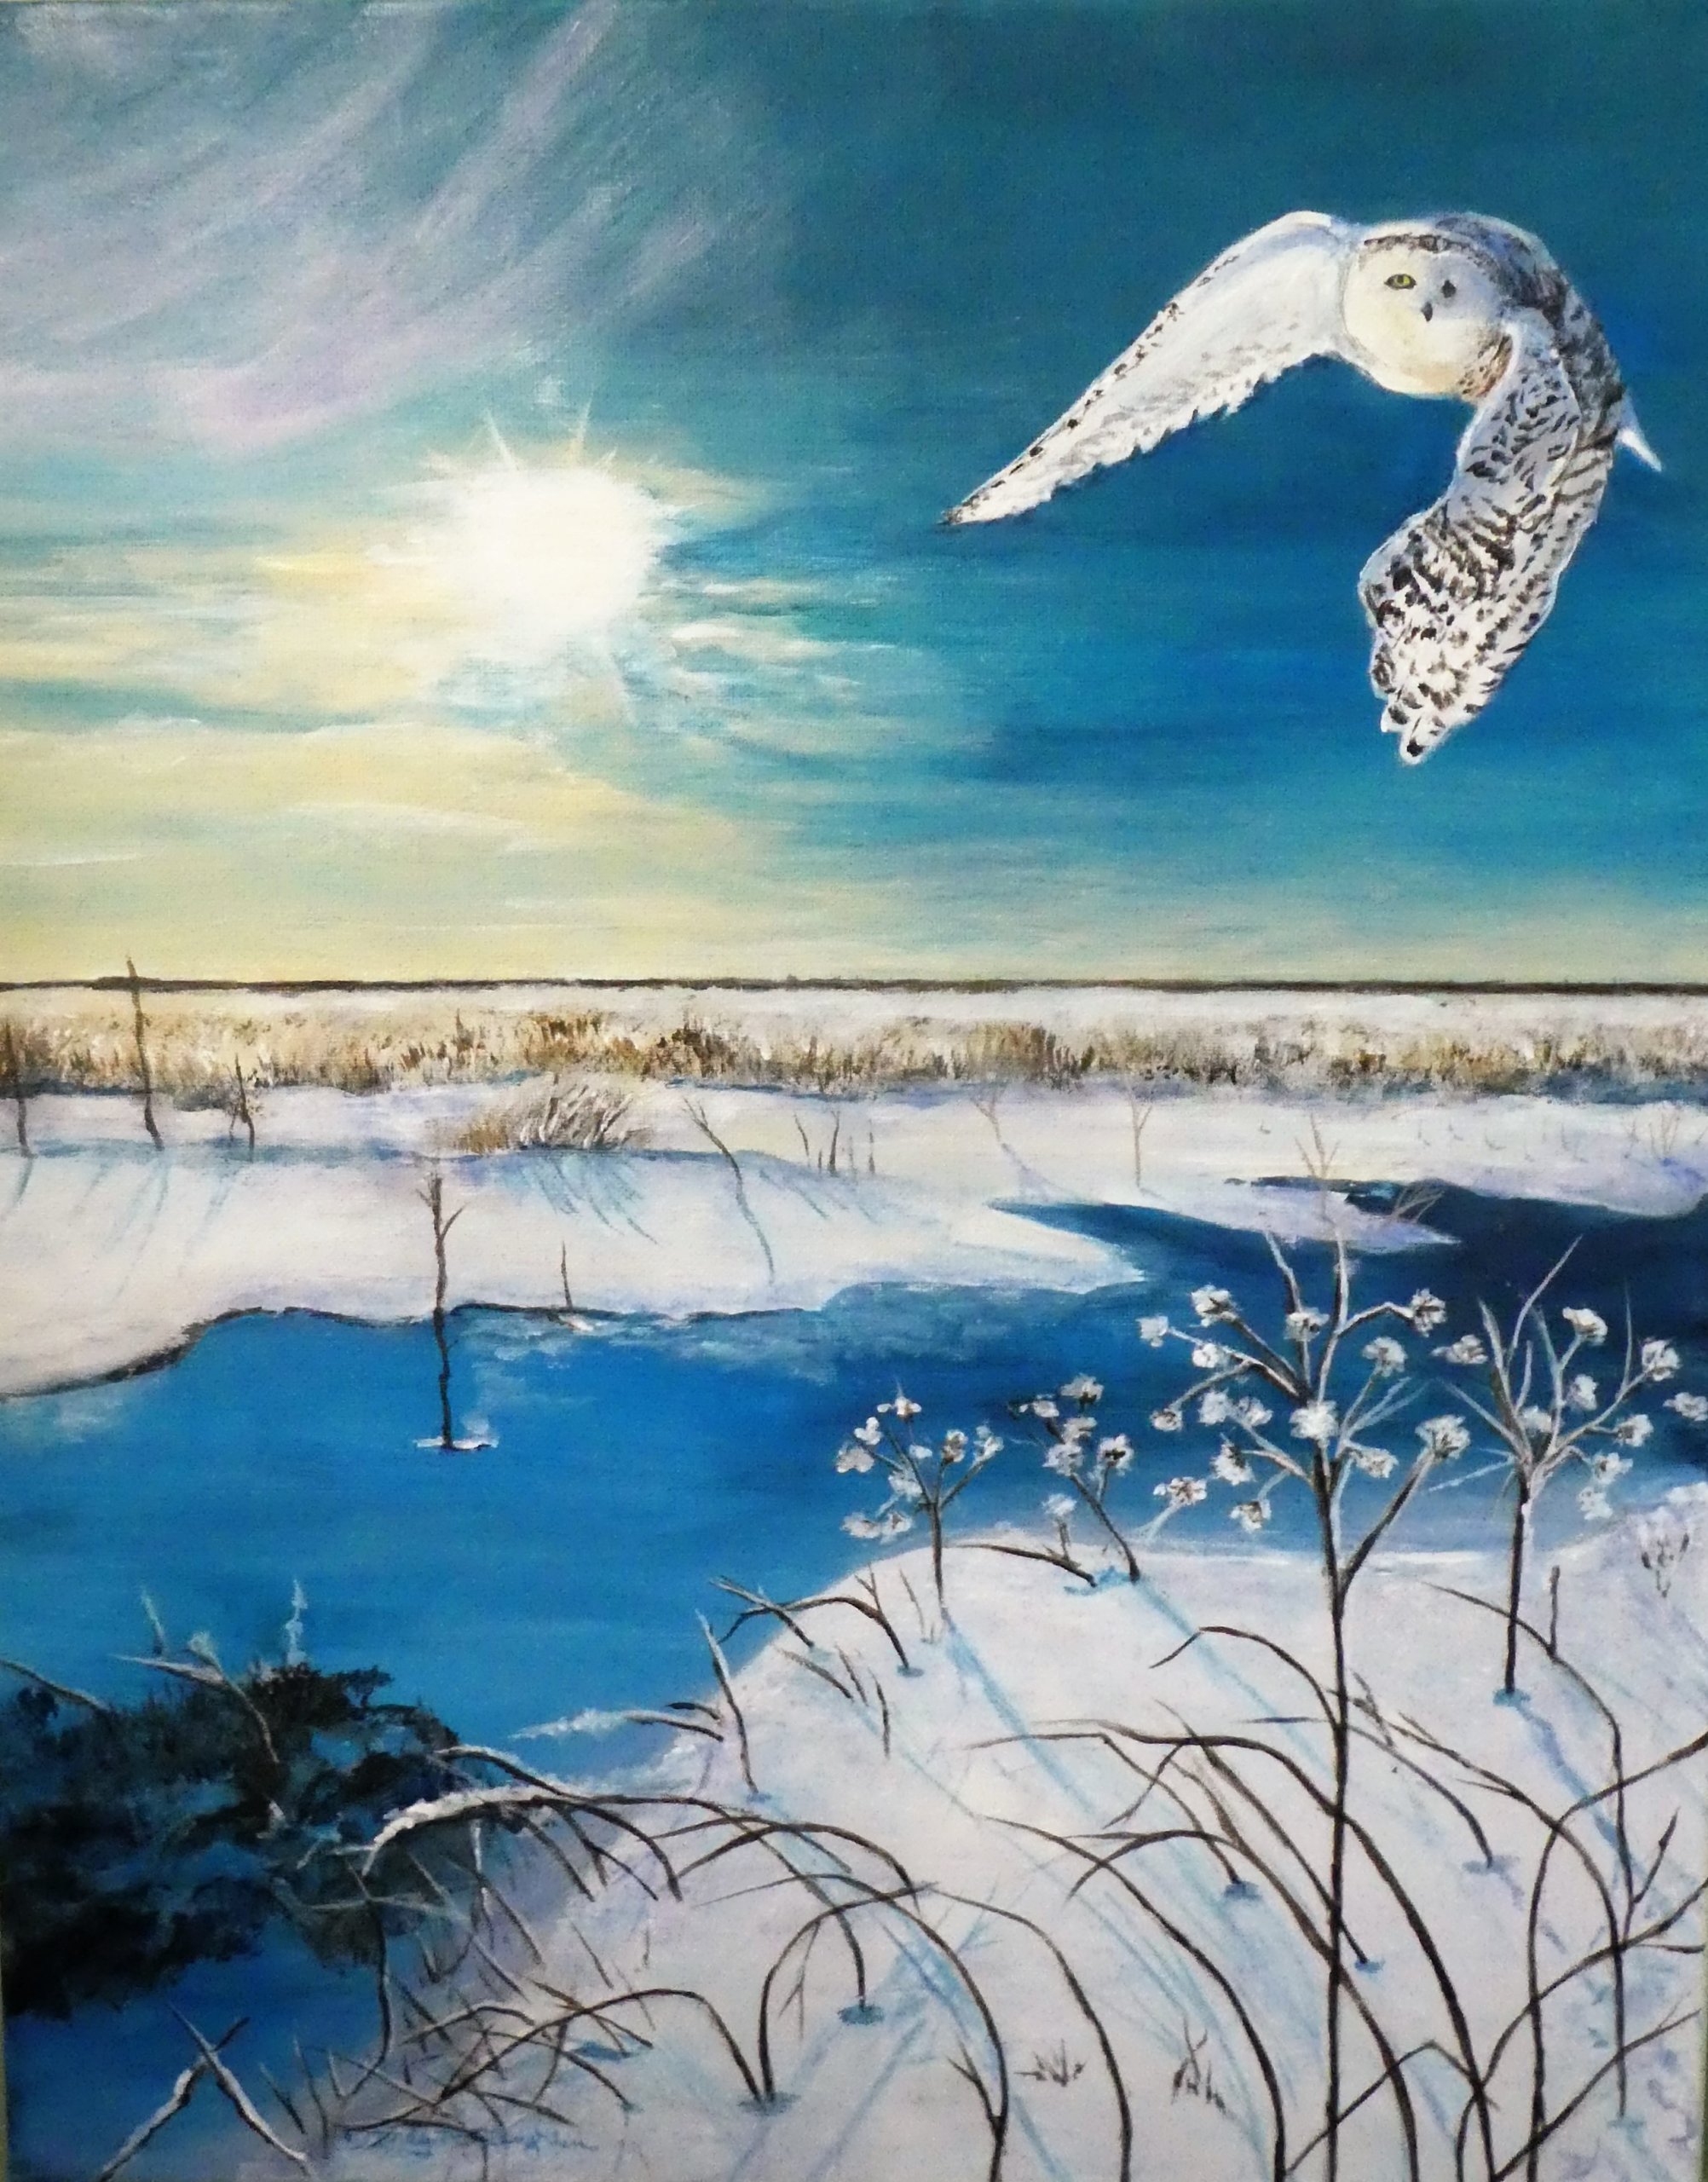 "Snowy Owl Soaring Over Field" by Wendy McLaughlin